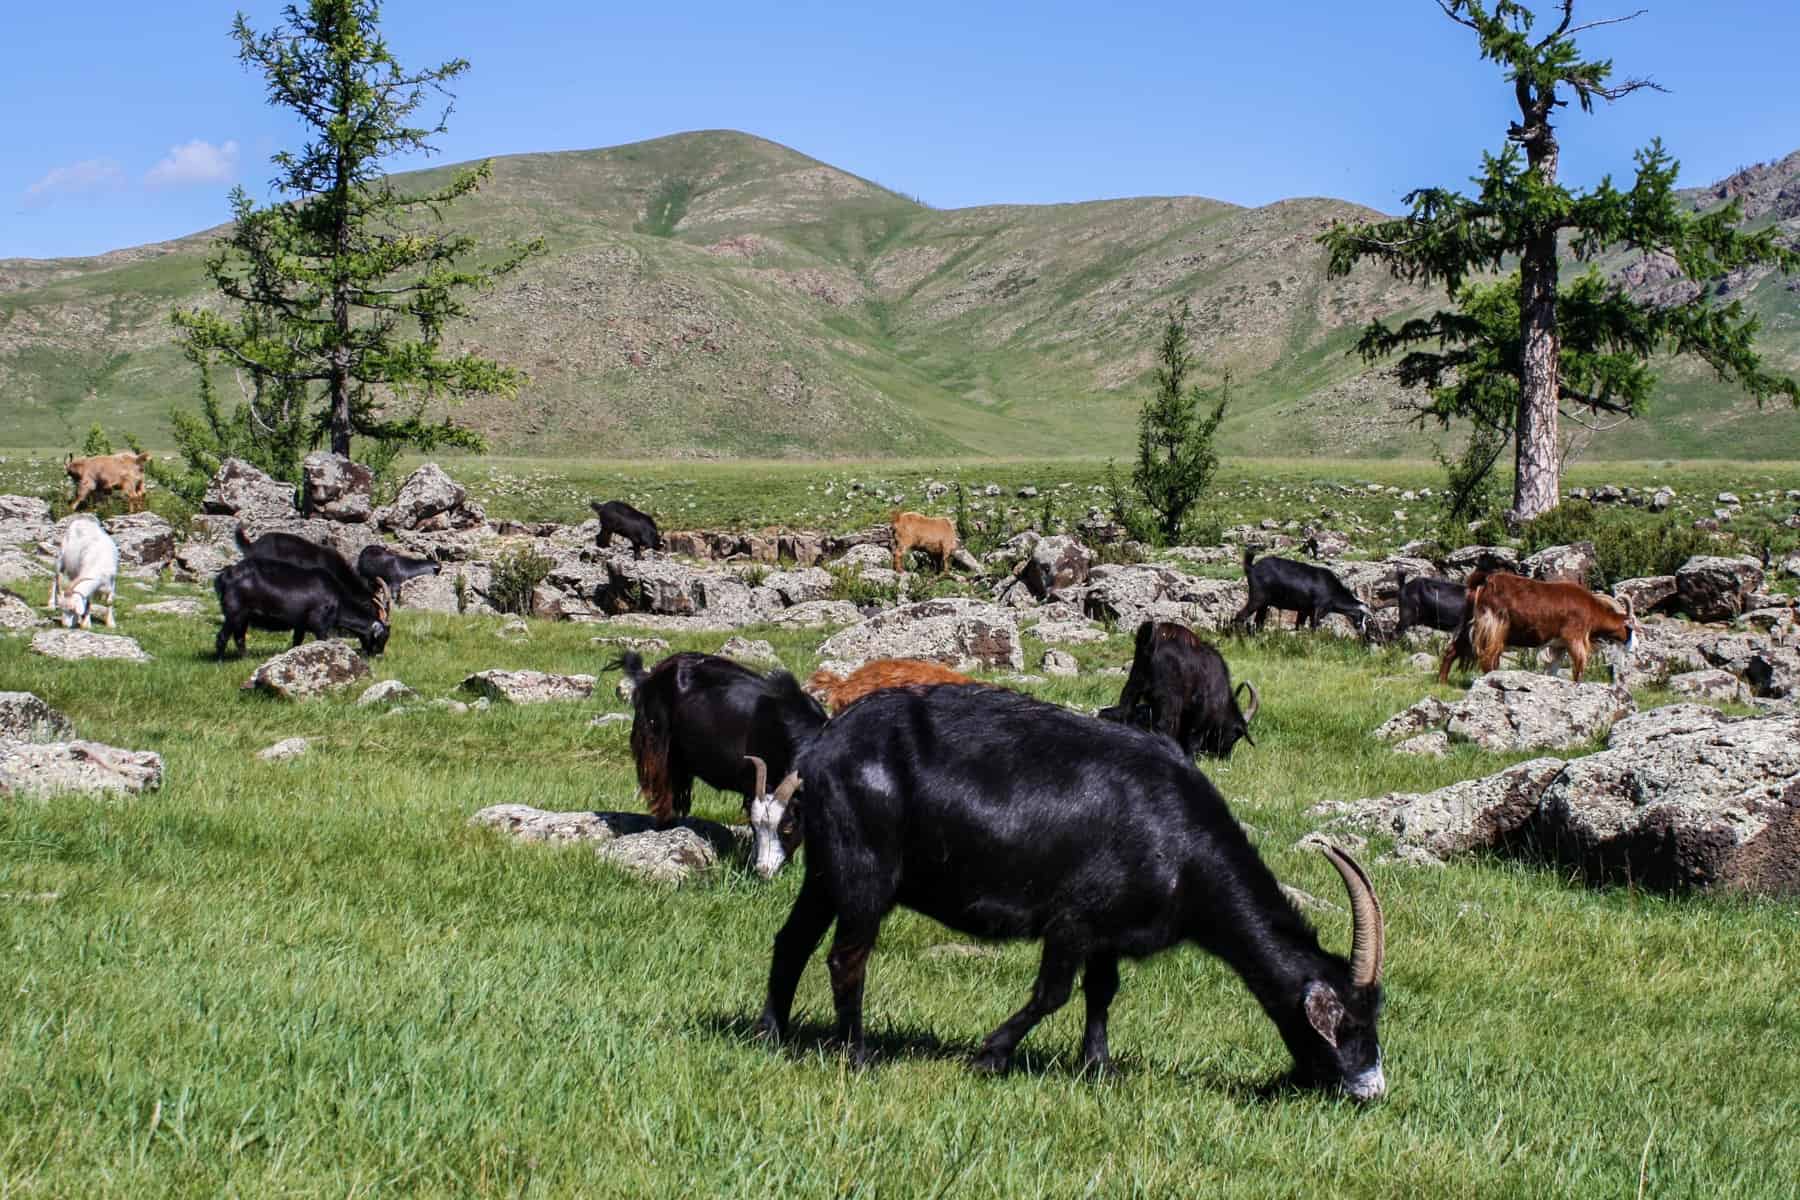 Black and brown goats eating fresh, green grass in a rocky area of Mongolia